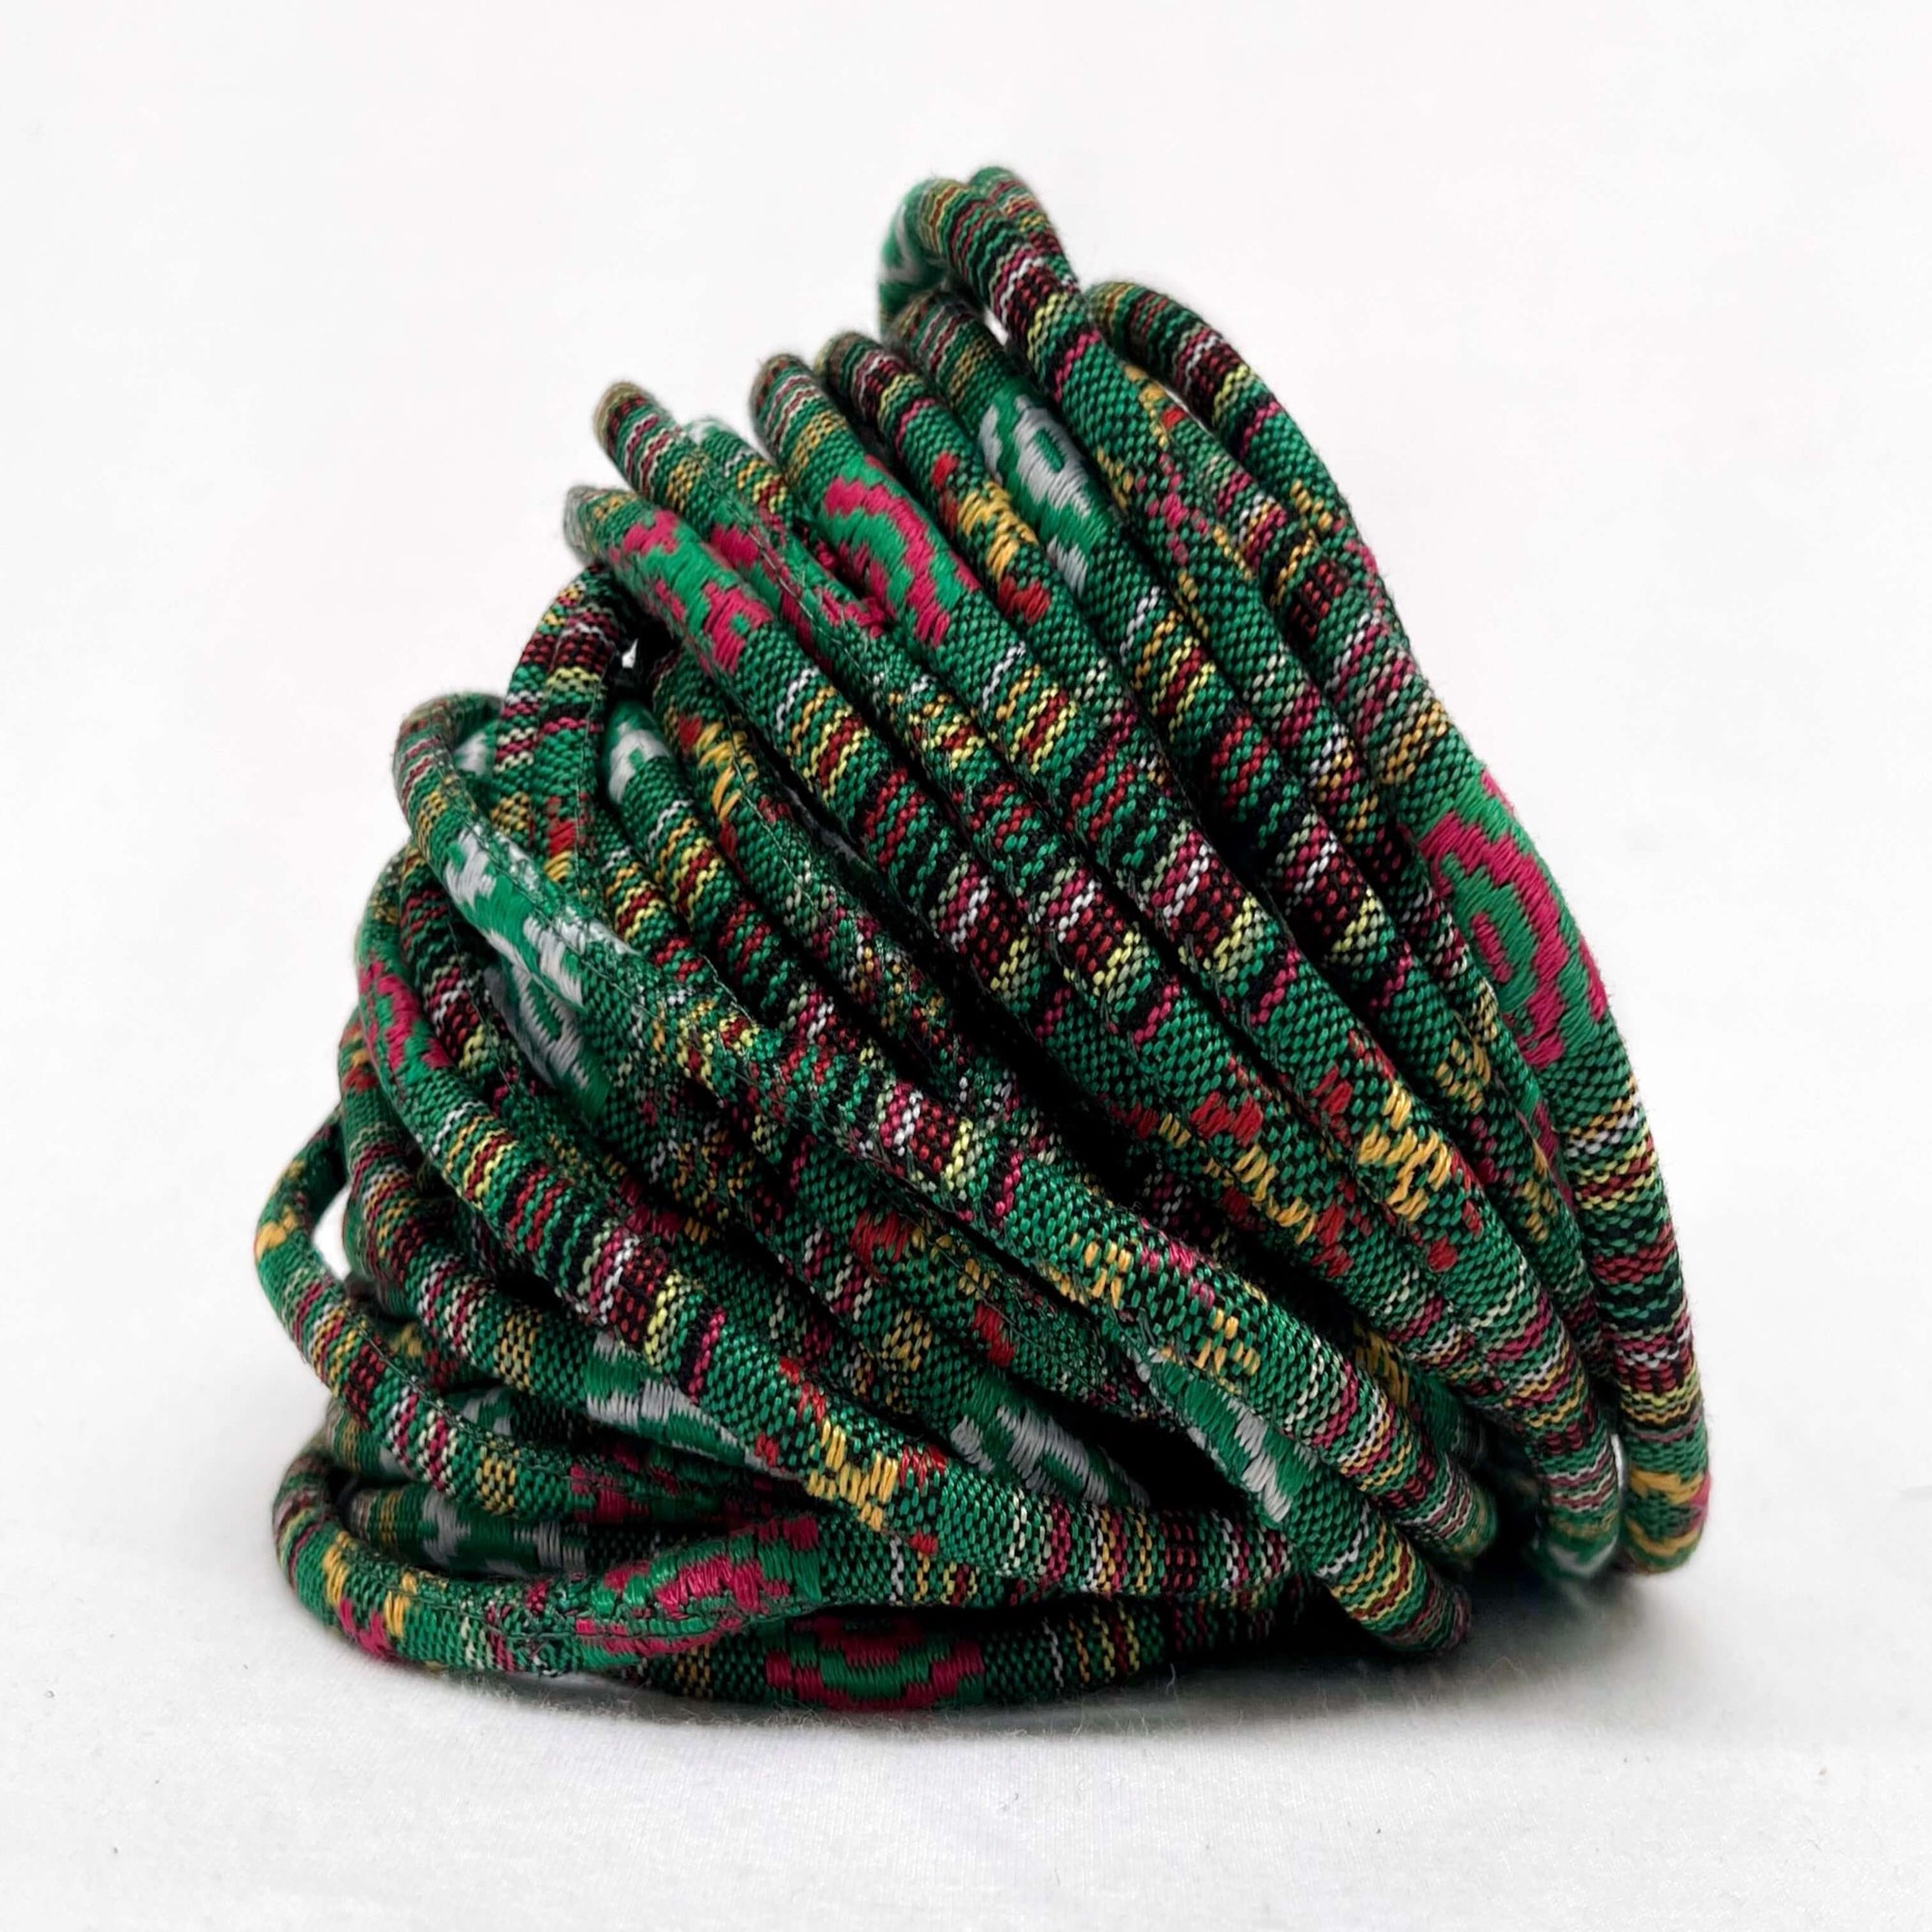 green and red braided woven cord against white background